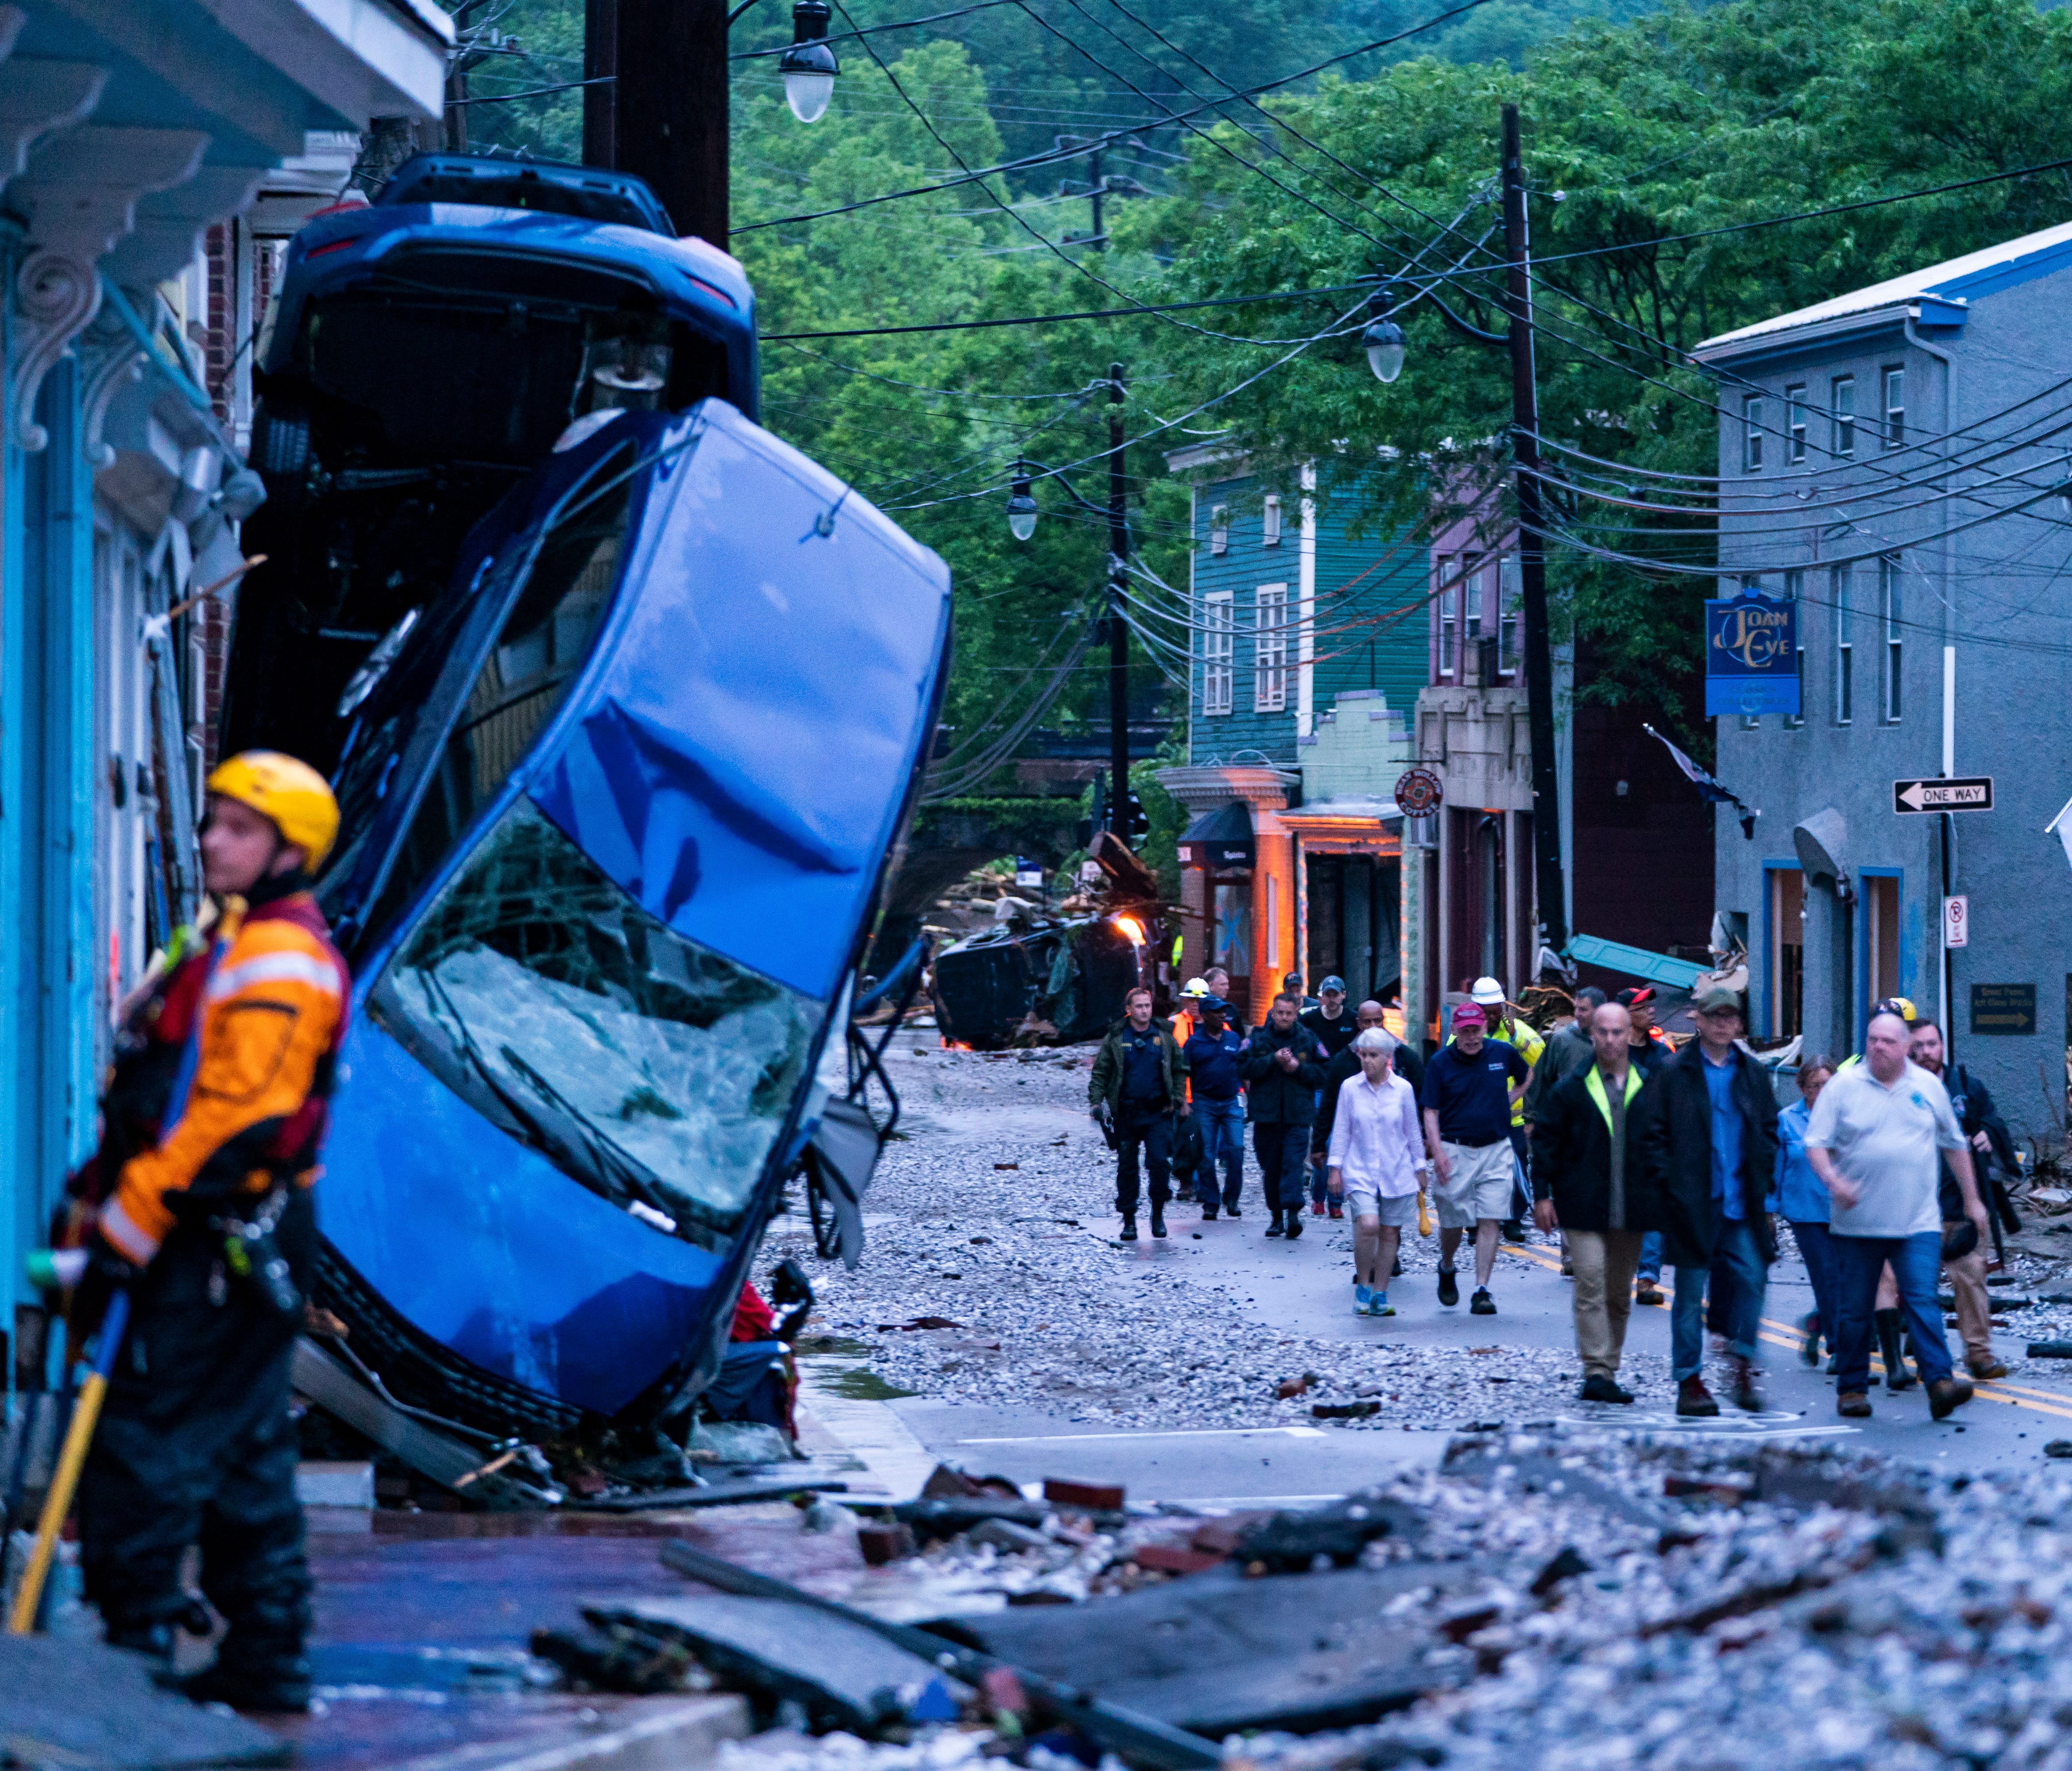 Rescue personnel examine damage on Main Street after a flash flood rushed through the historic town of Ellicott City, Maryland, on May 27, 2018.